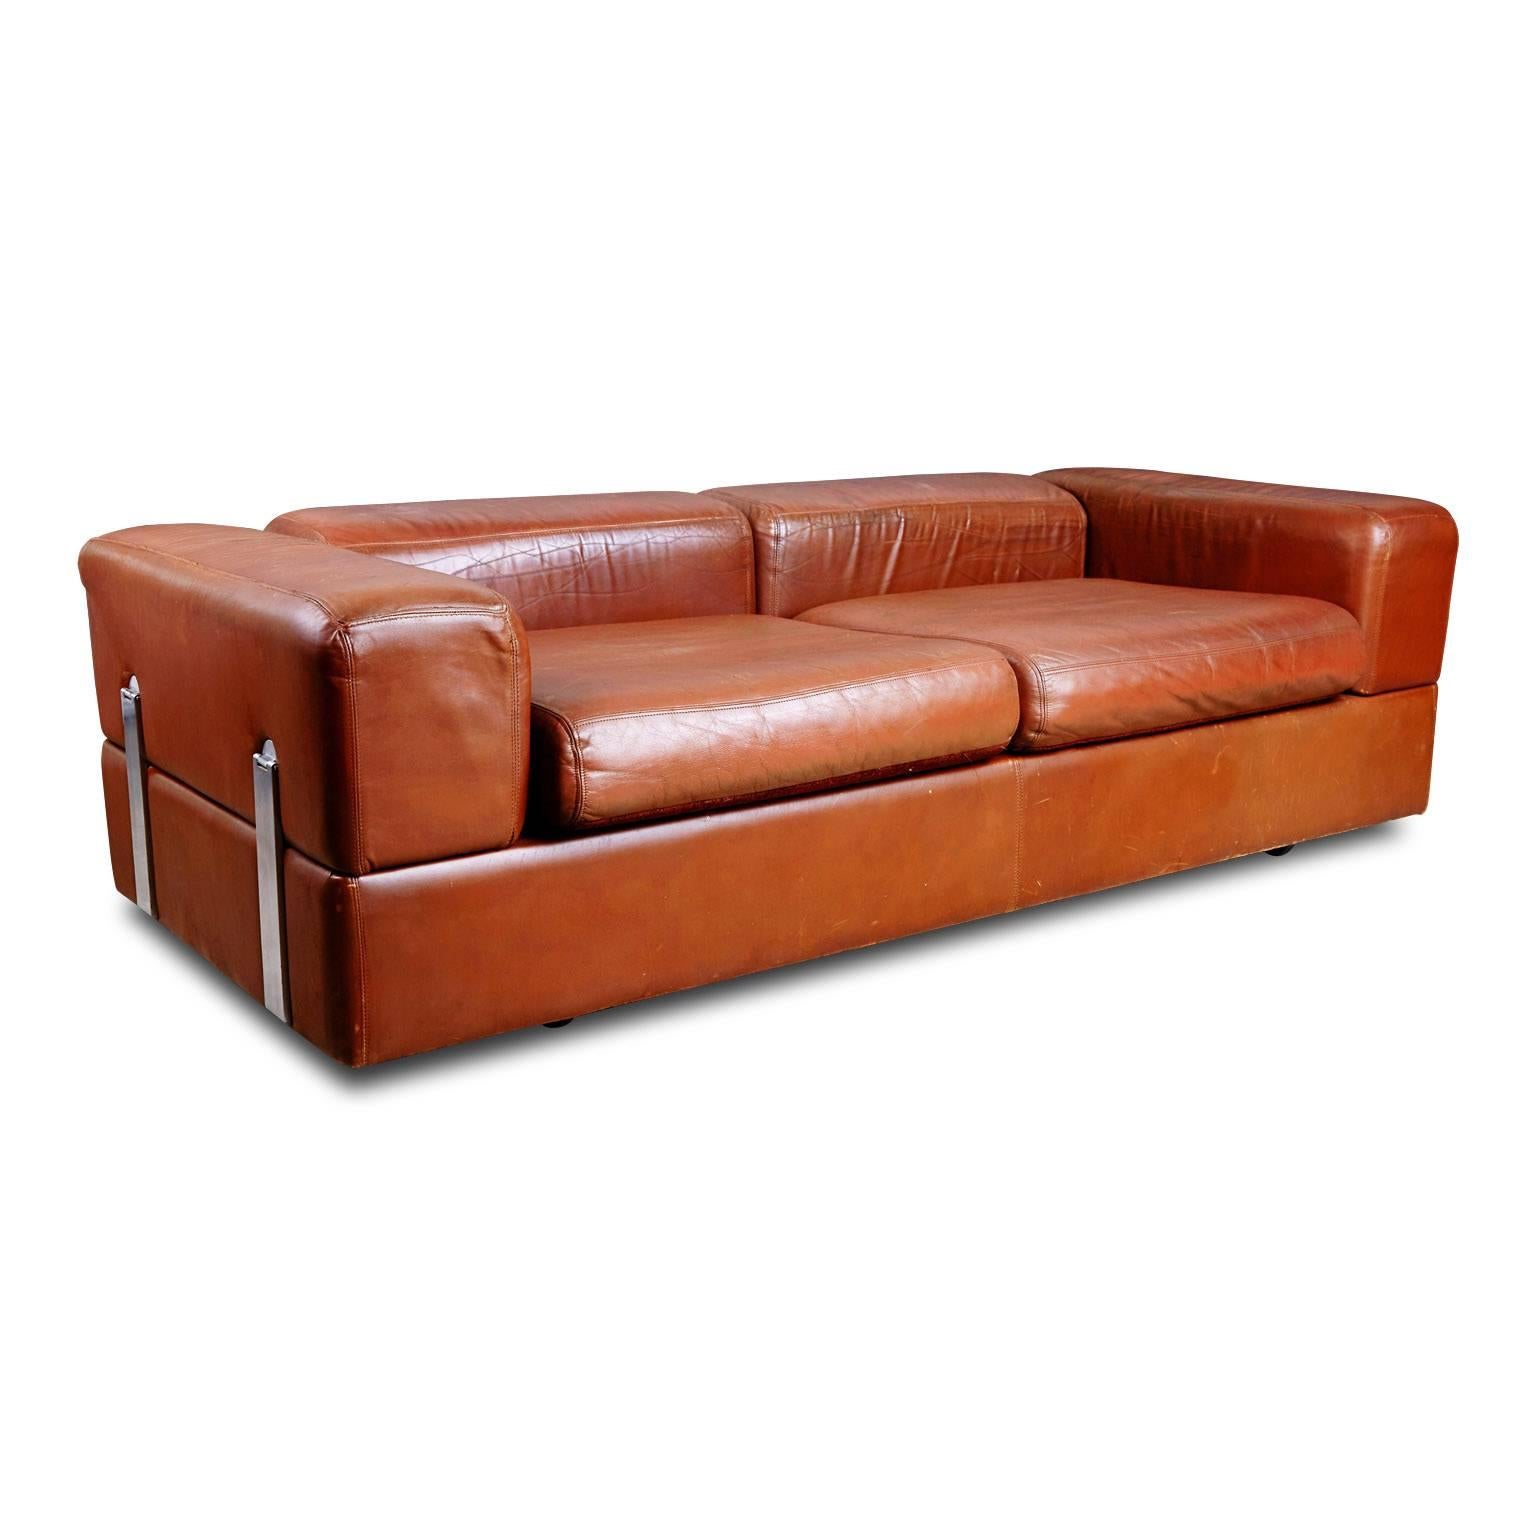 Sumptuous leather sofa that conveniently converts to bed with side tables by Italian designer Tito Agnoli for Stendig. This neat design transforms from a comfortable couch into a bed by pushing down the arm and the backrests. When these are flipped